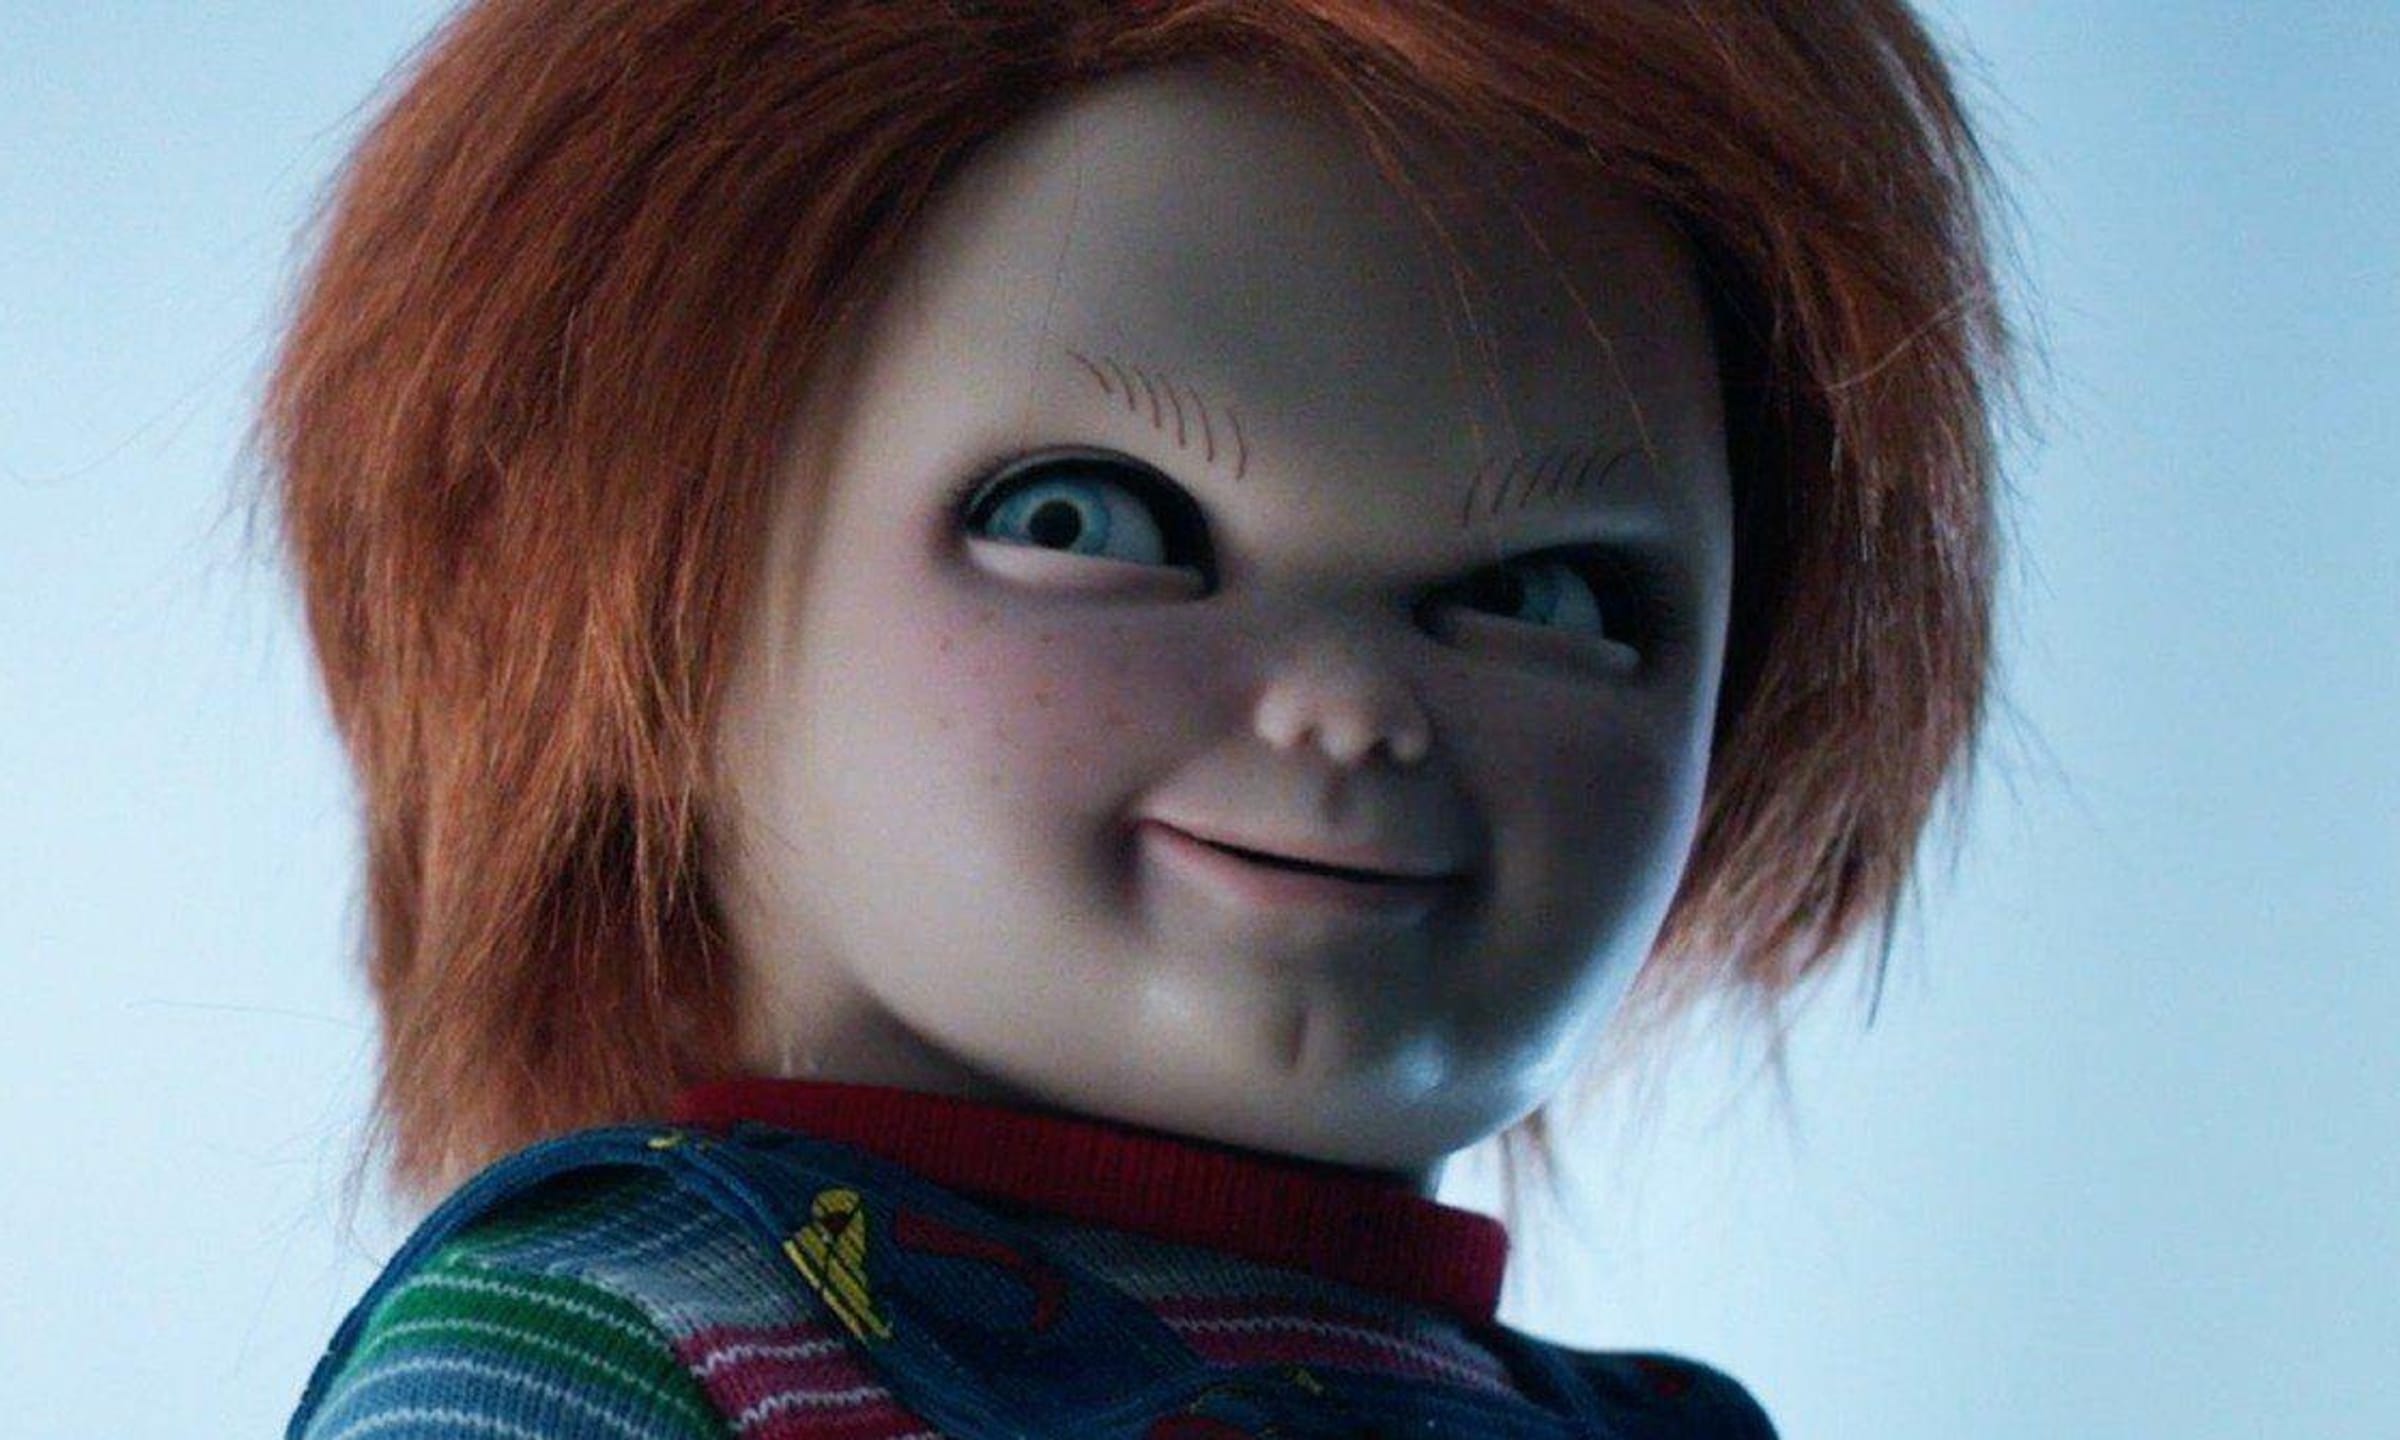 How to Watch the Child's Play and Chucky Movies in Chronological Order